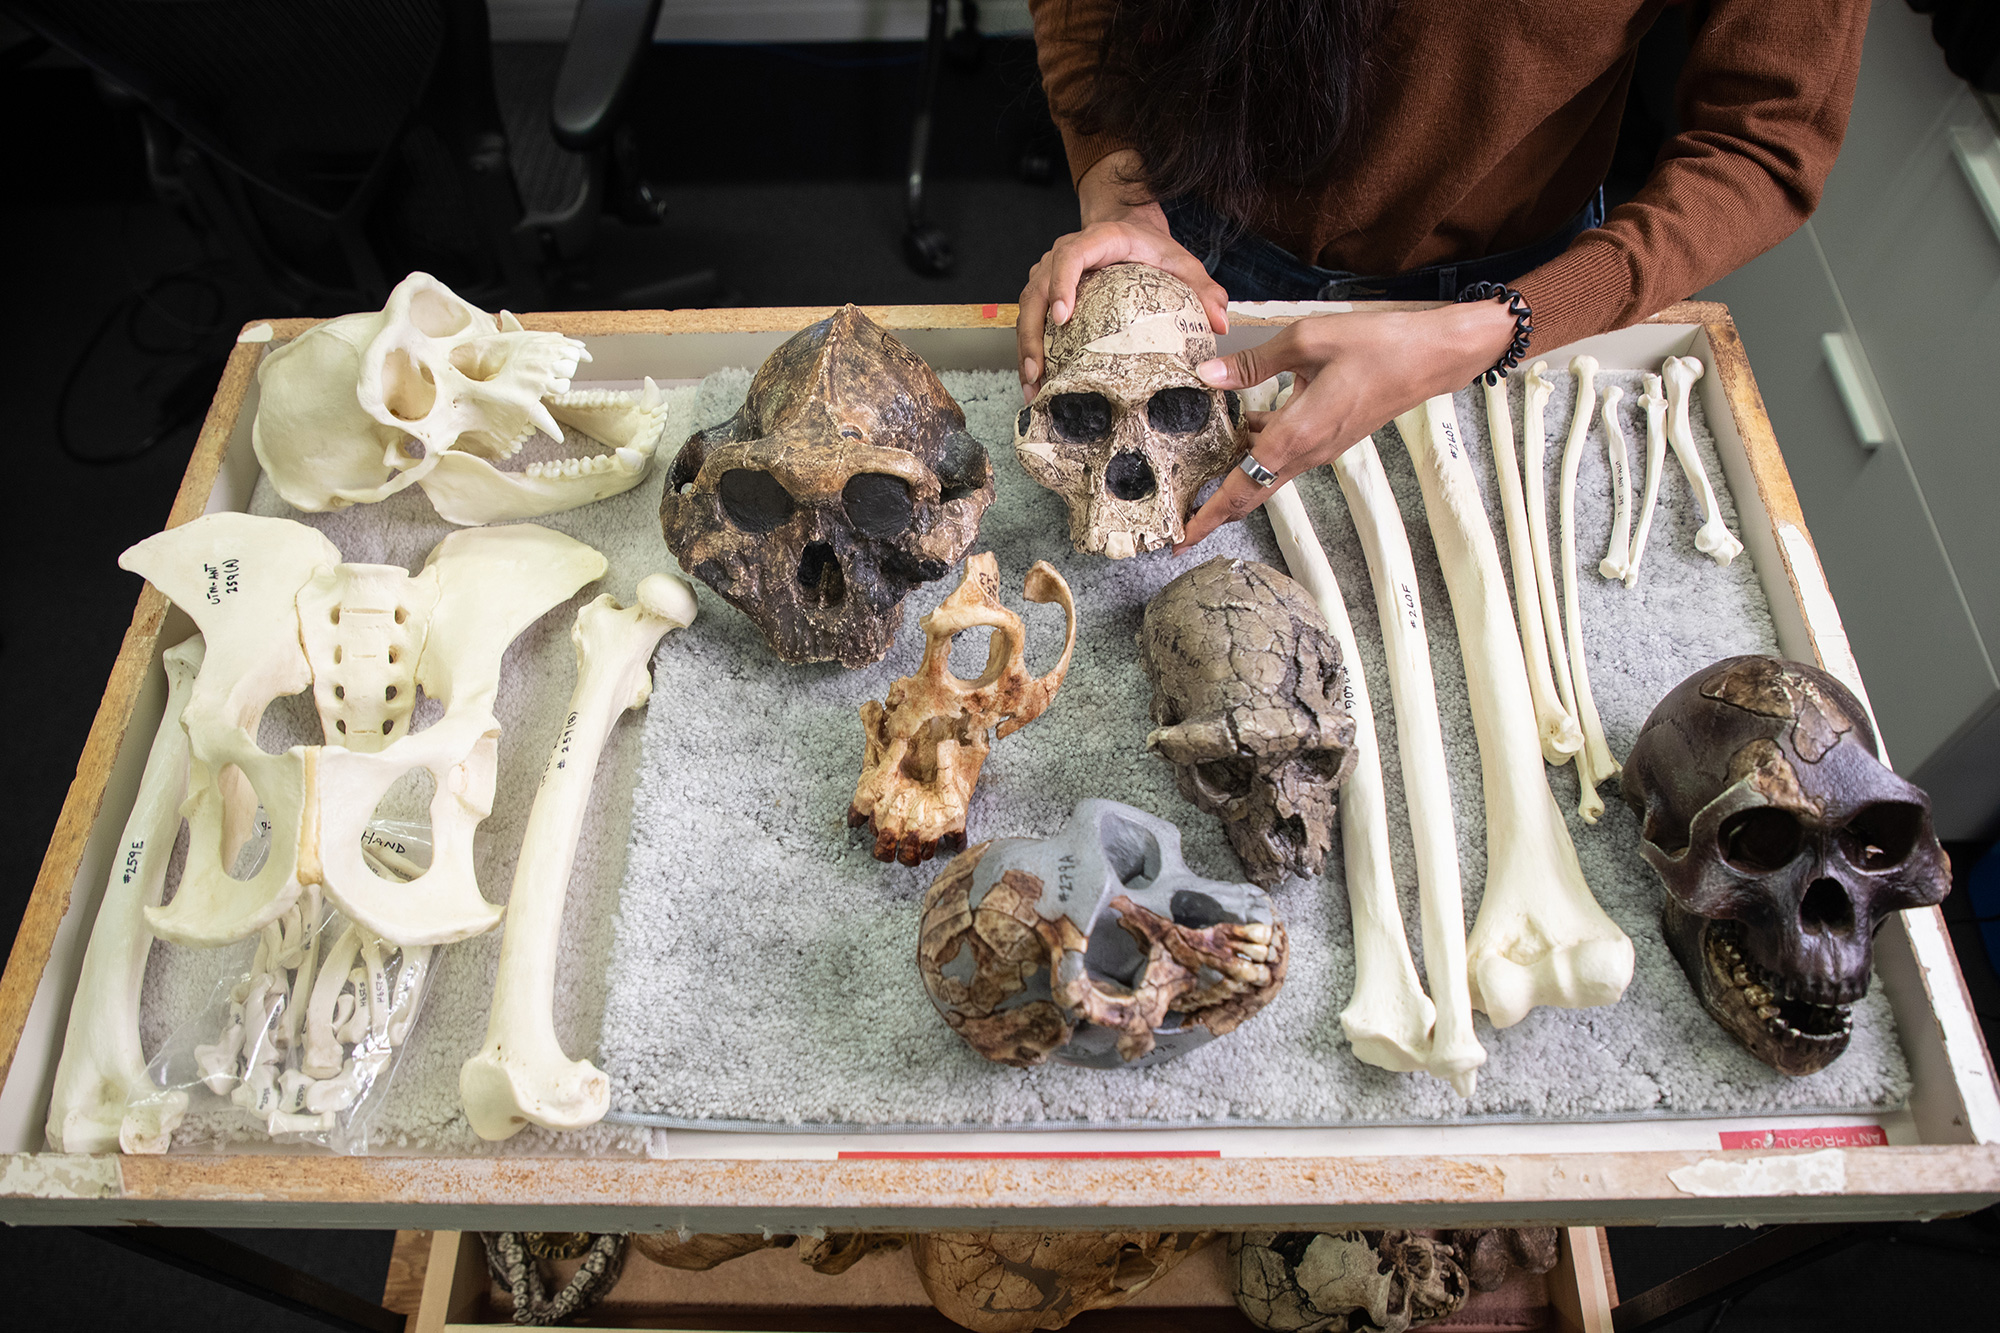 Hominin skulls and bones laid out on a tray; one skull is being held up by someone